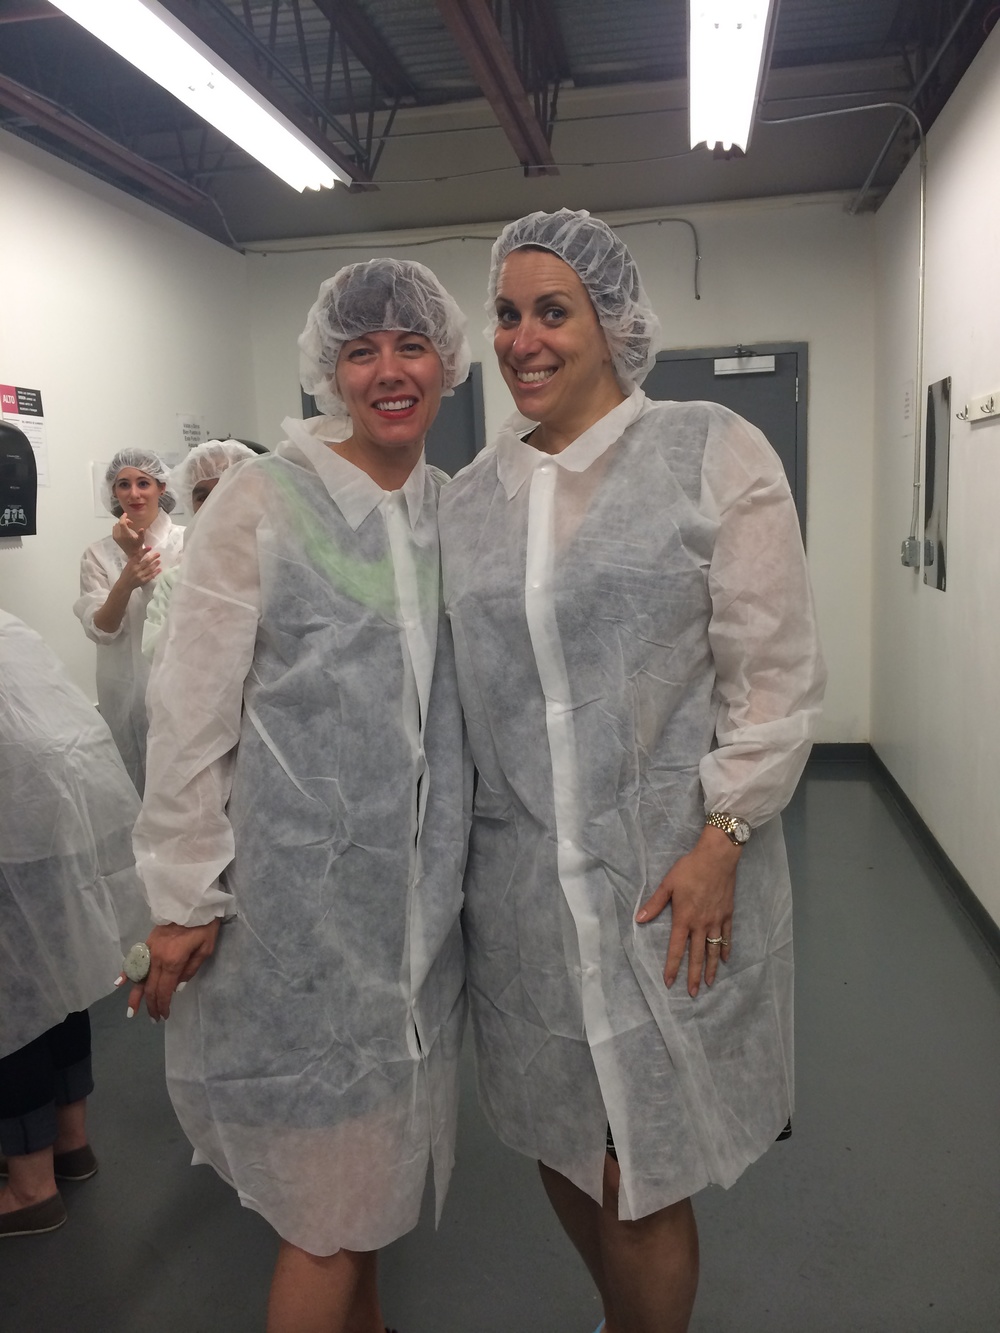  All dressed up for a tour of the JCOCO factory floor. 